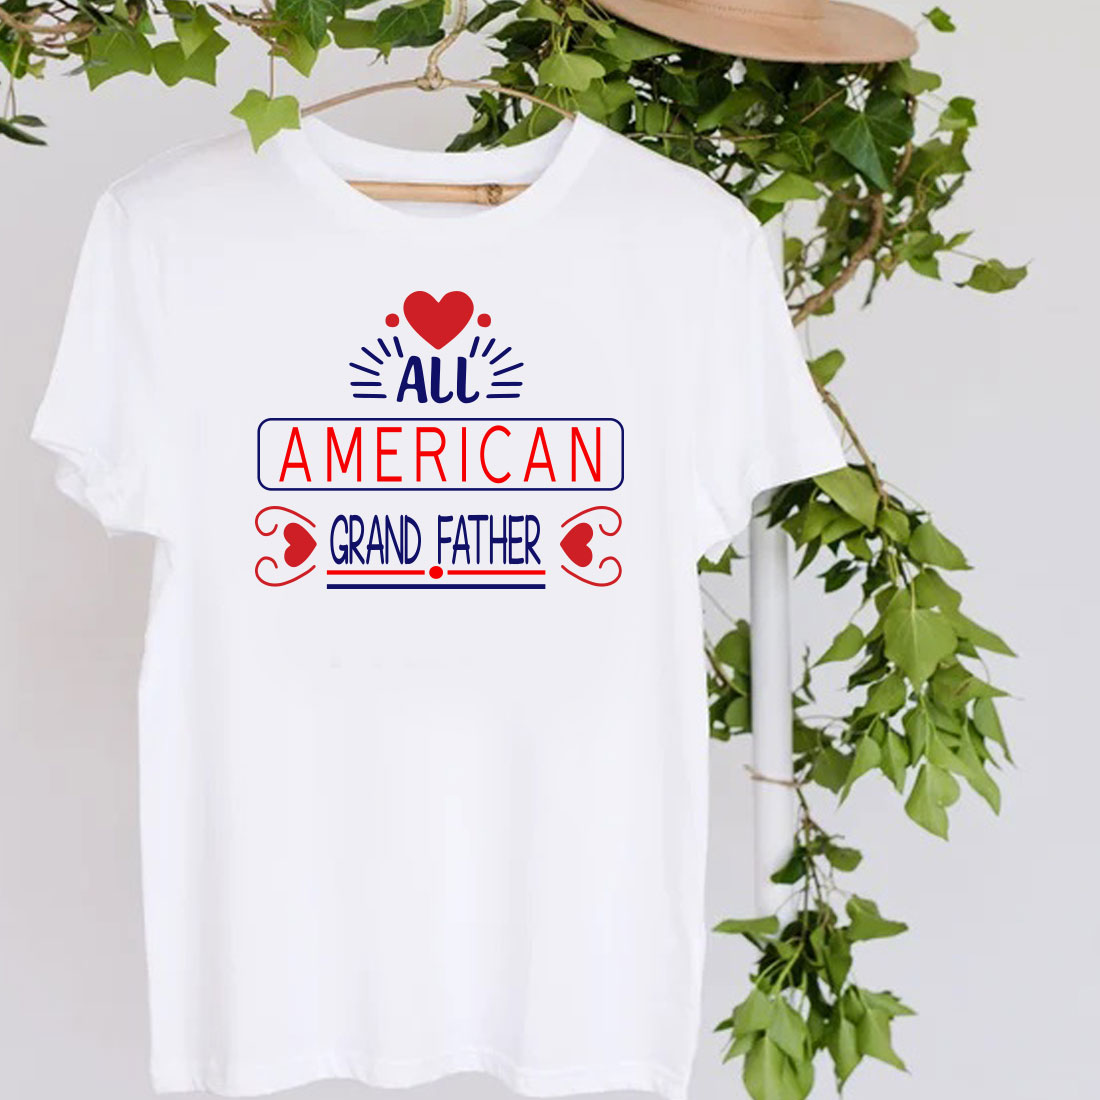 White t - shirt with the words all american and a heart on it.